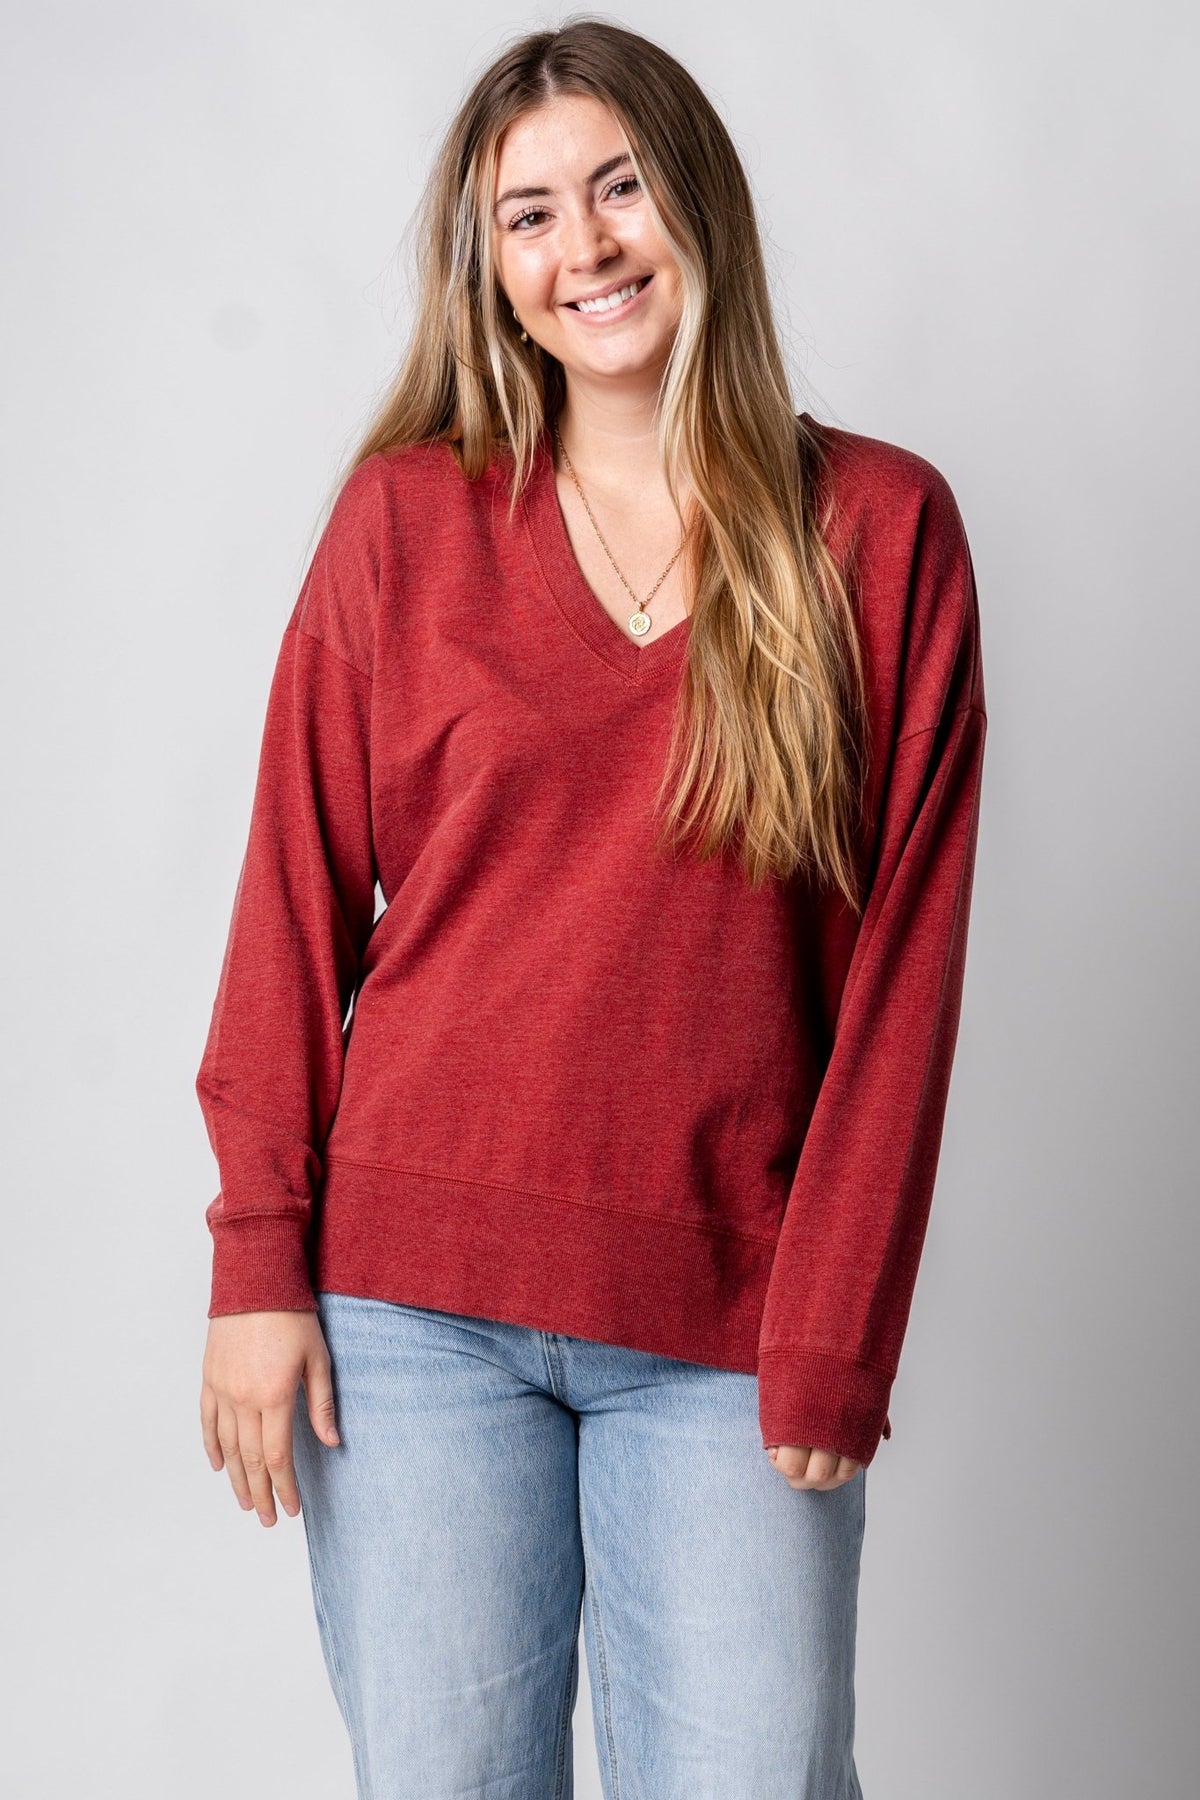 Z Supply modern v-neck weekender ruby - Z Supply Top - Z Supply Tops, Dresses, Tanks, Tees, Cardigans, Joggers and Loungewear at Lush Fashion Lounge